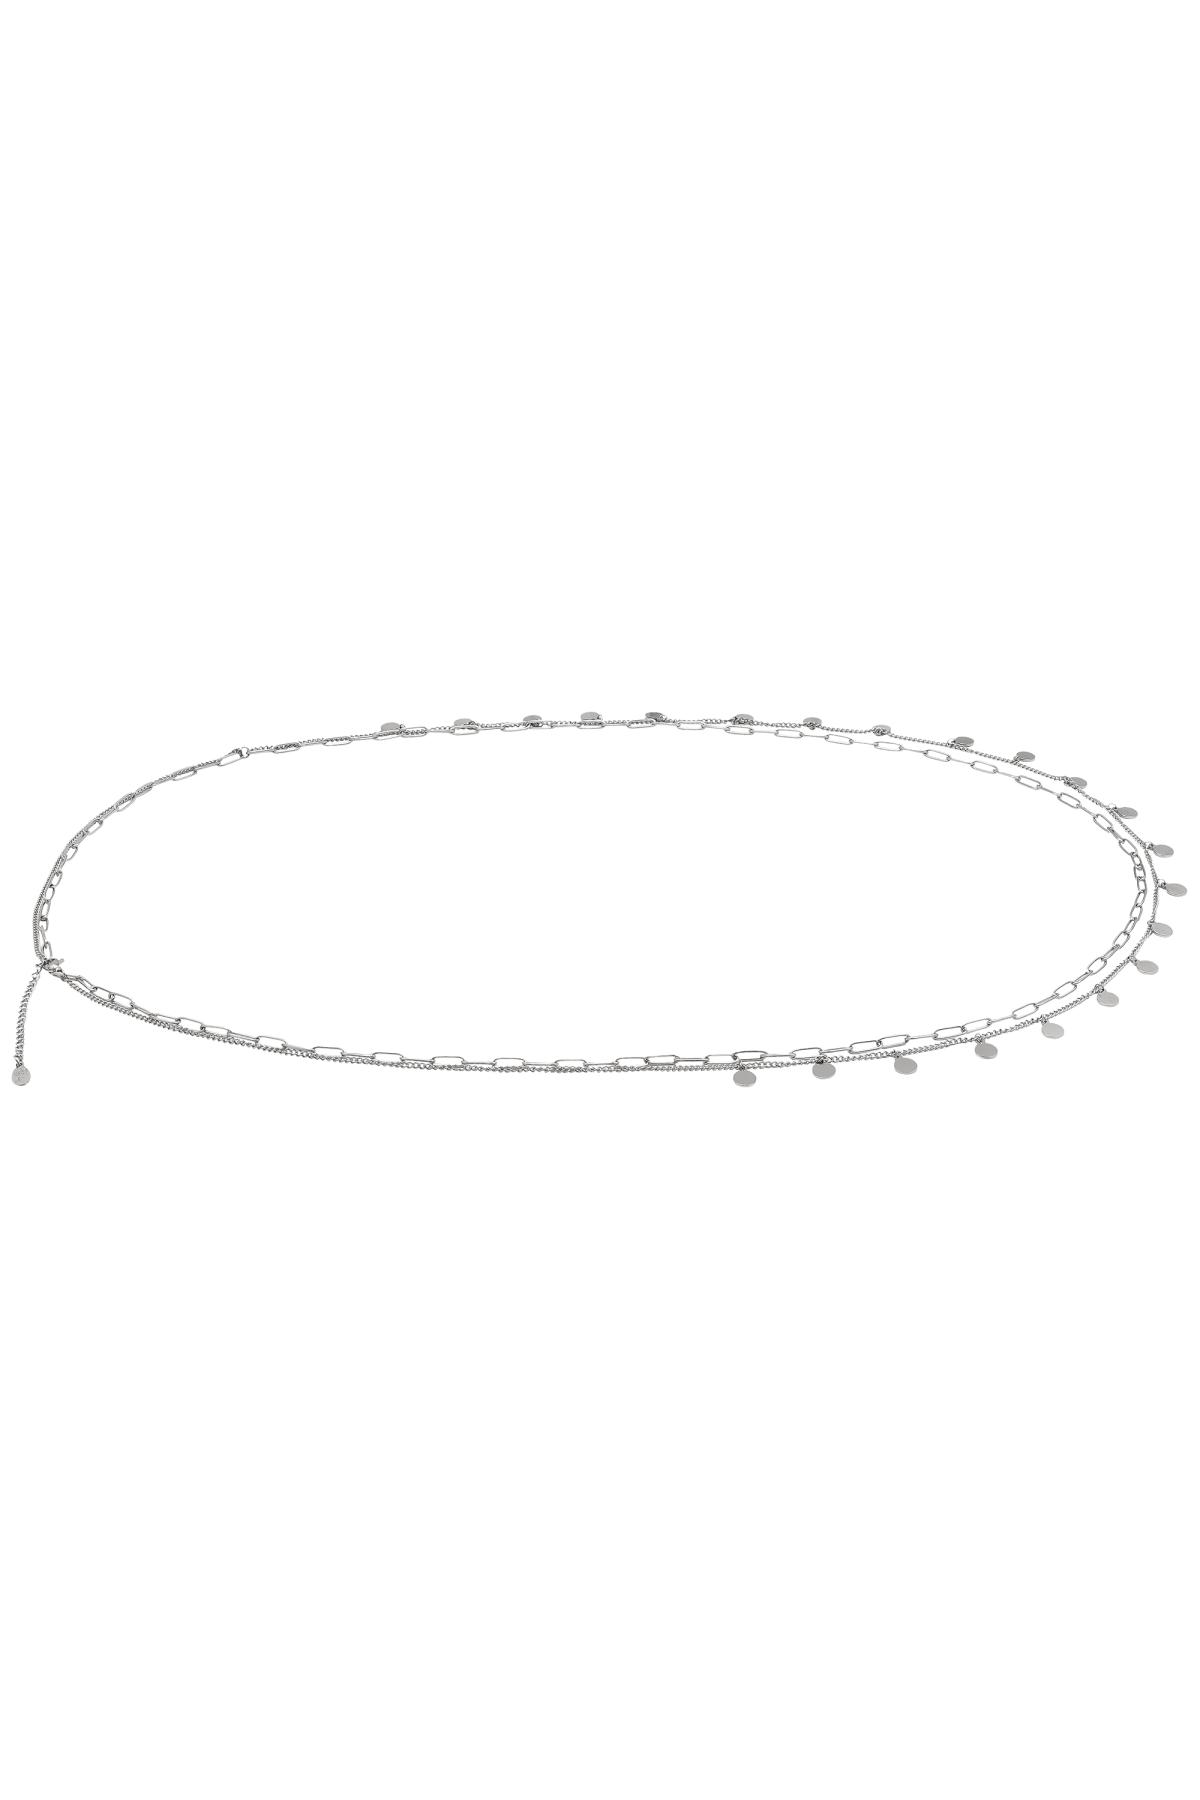 Belly chain circles Silver Stainless Steel